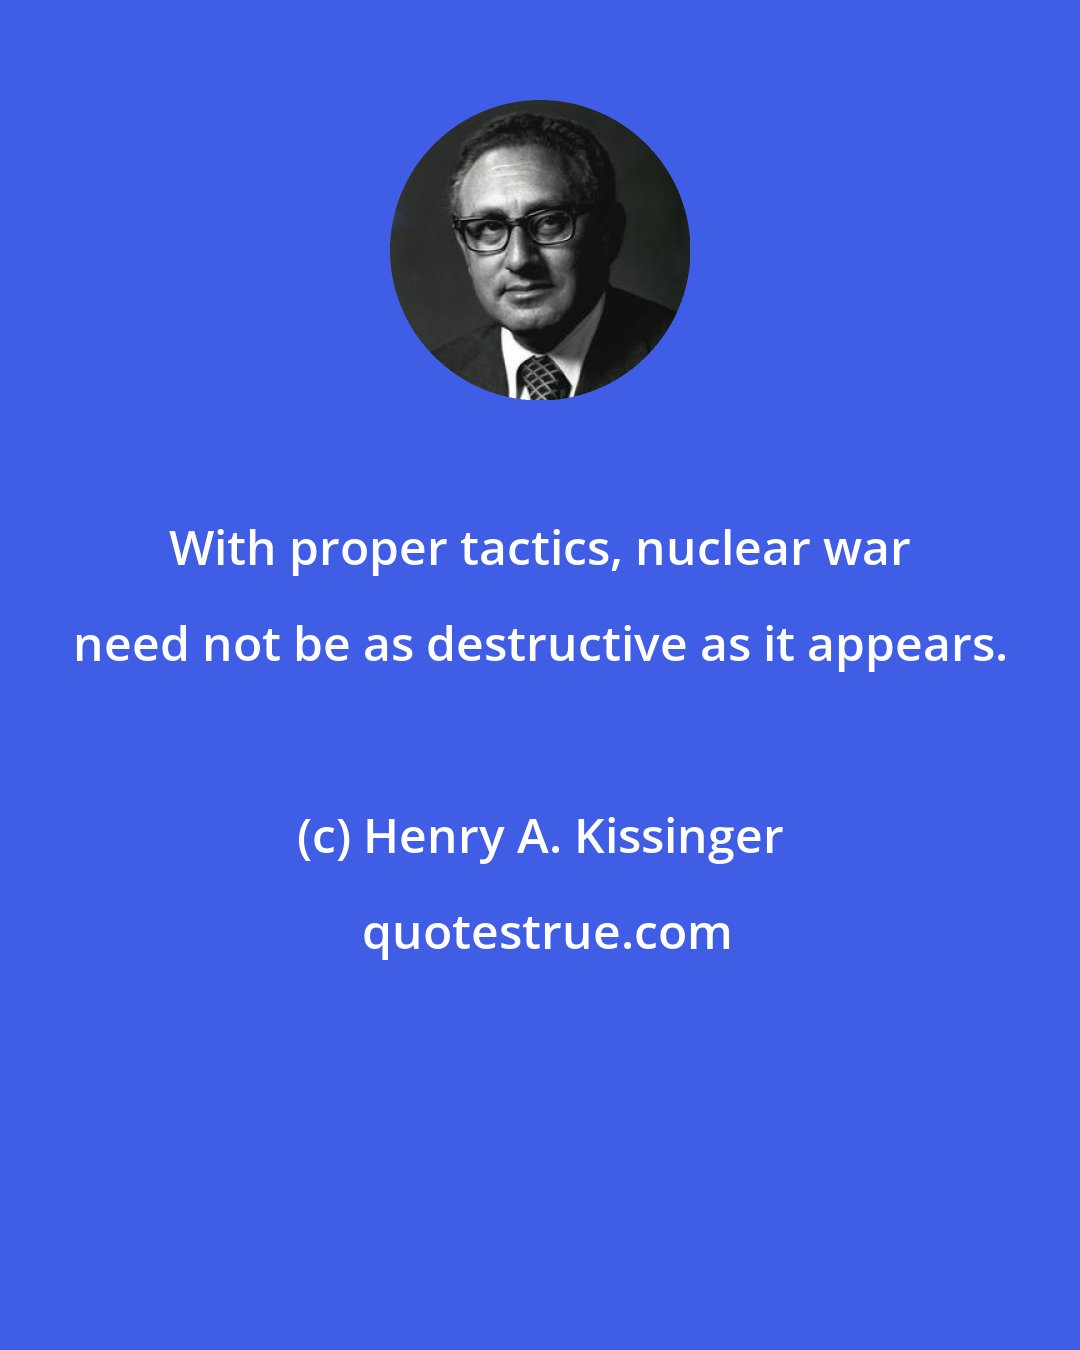 Henry A. Kissinger: With proper tactics, nuclear war need not be as destructive as it appears.